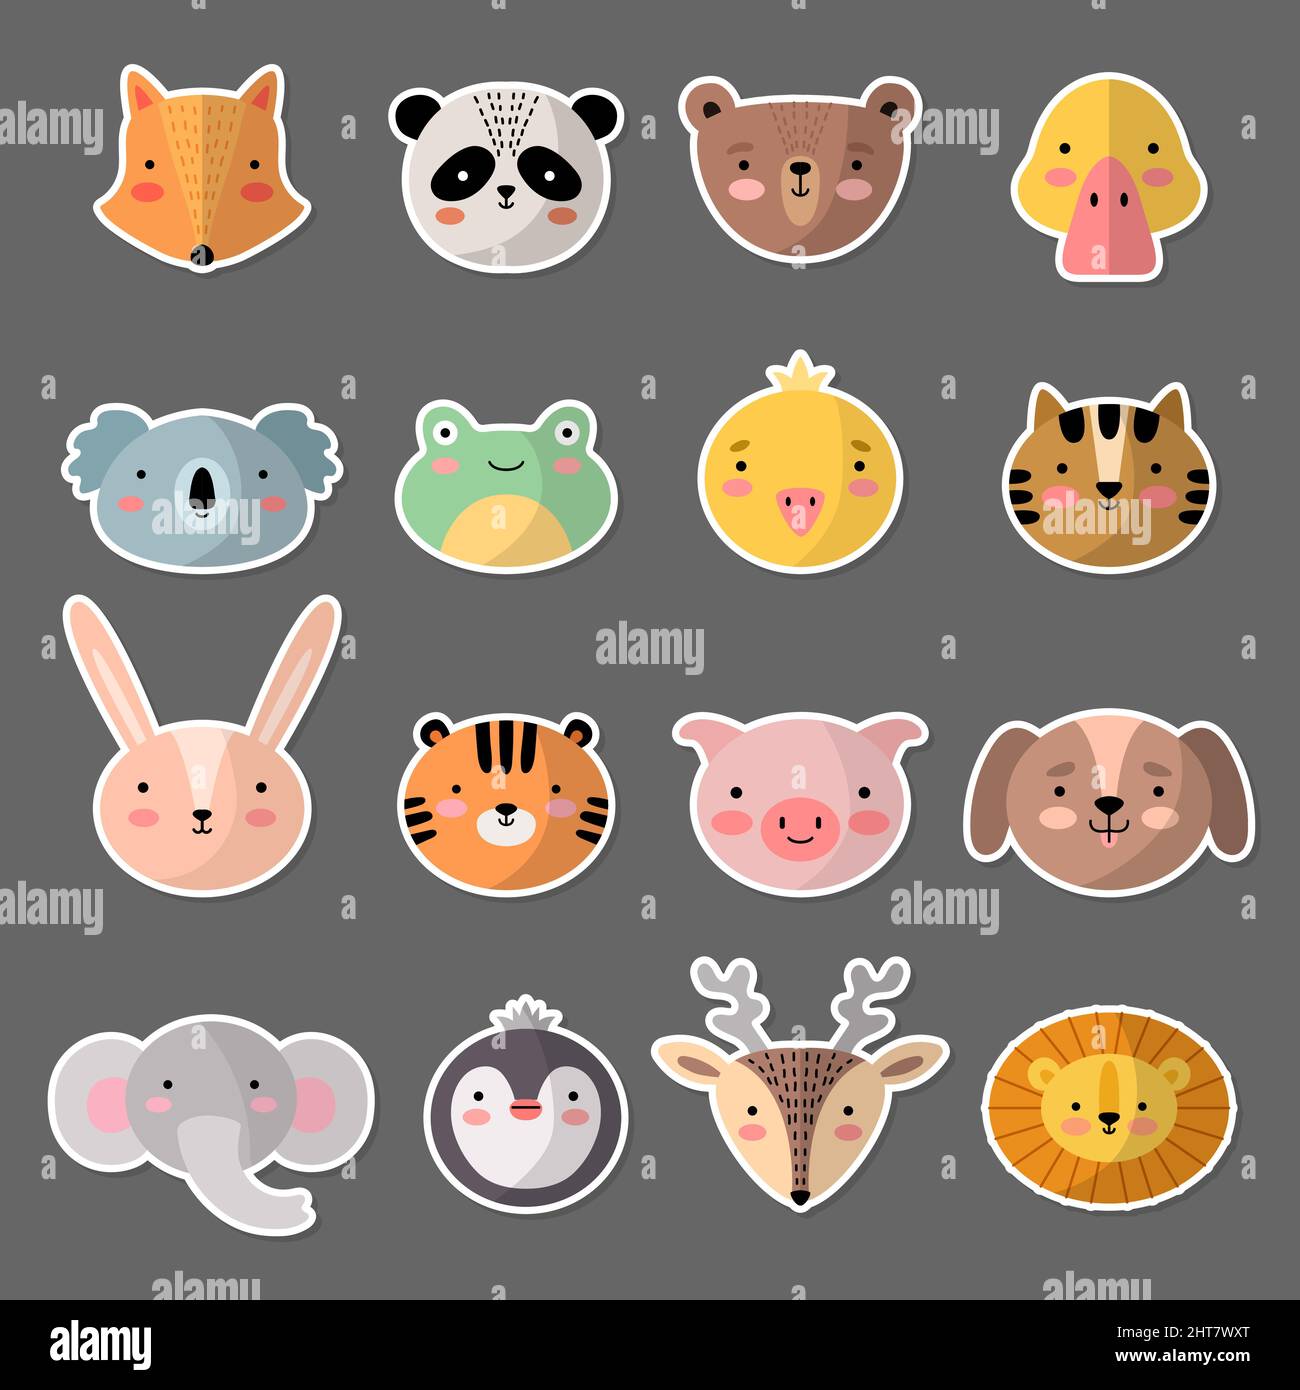 Cute animal head. Kawaii faces smiling avatars different expressions penguin panda pig stickers recent vector illustrations set Stock Vector